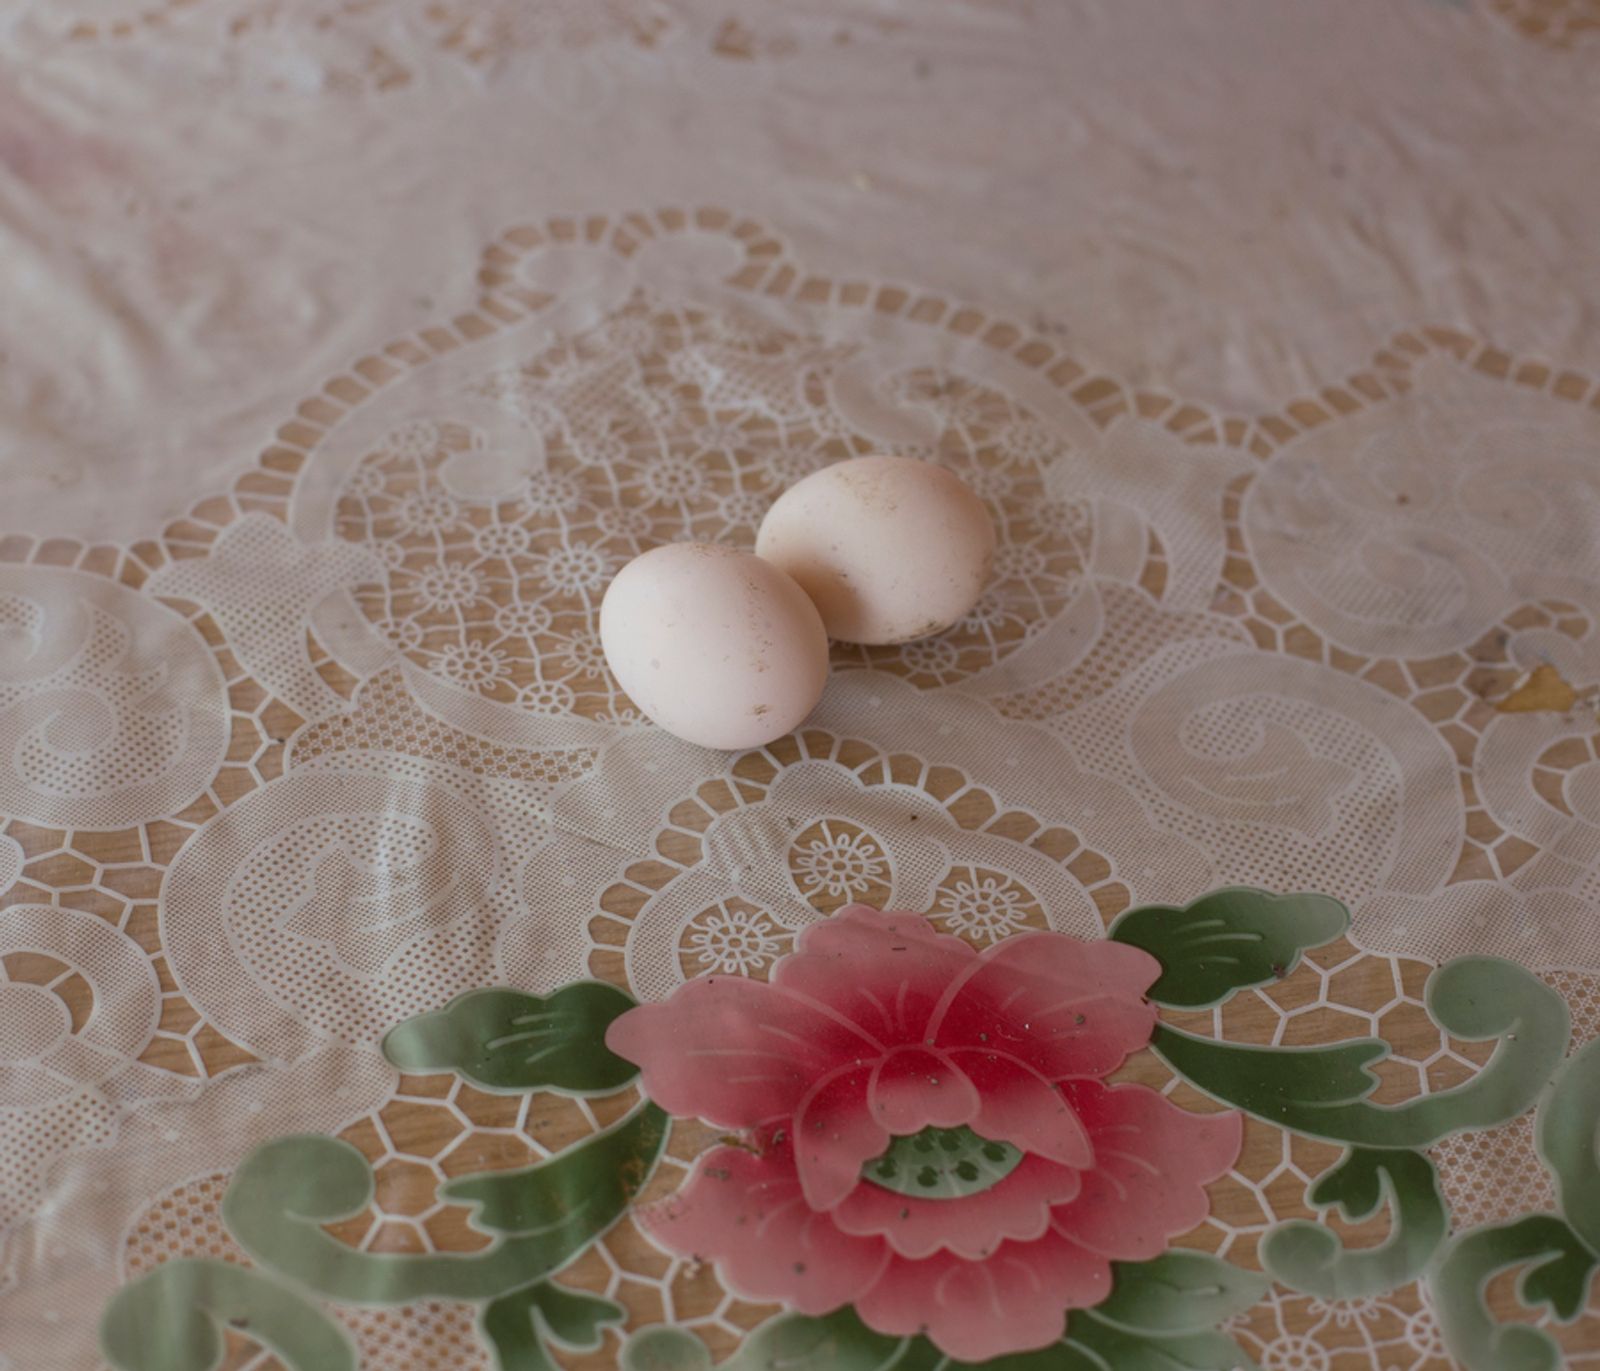 © Myriam Meloni - Eggs. The young brides are supposed to have their first child, within the first years of marriage.